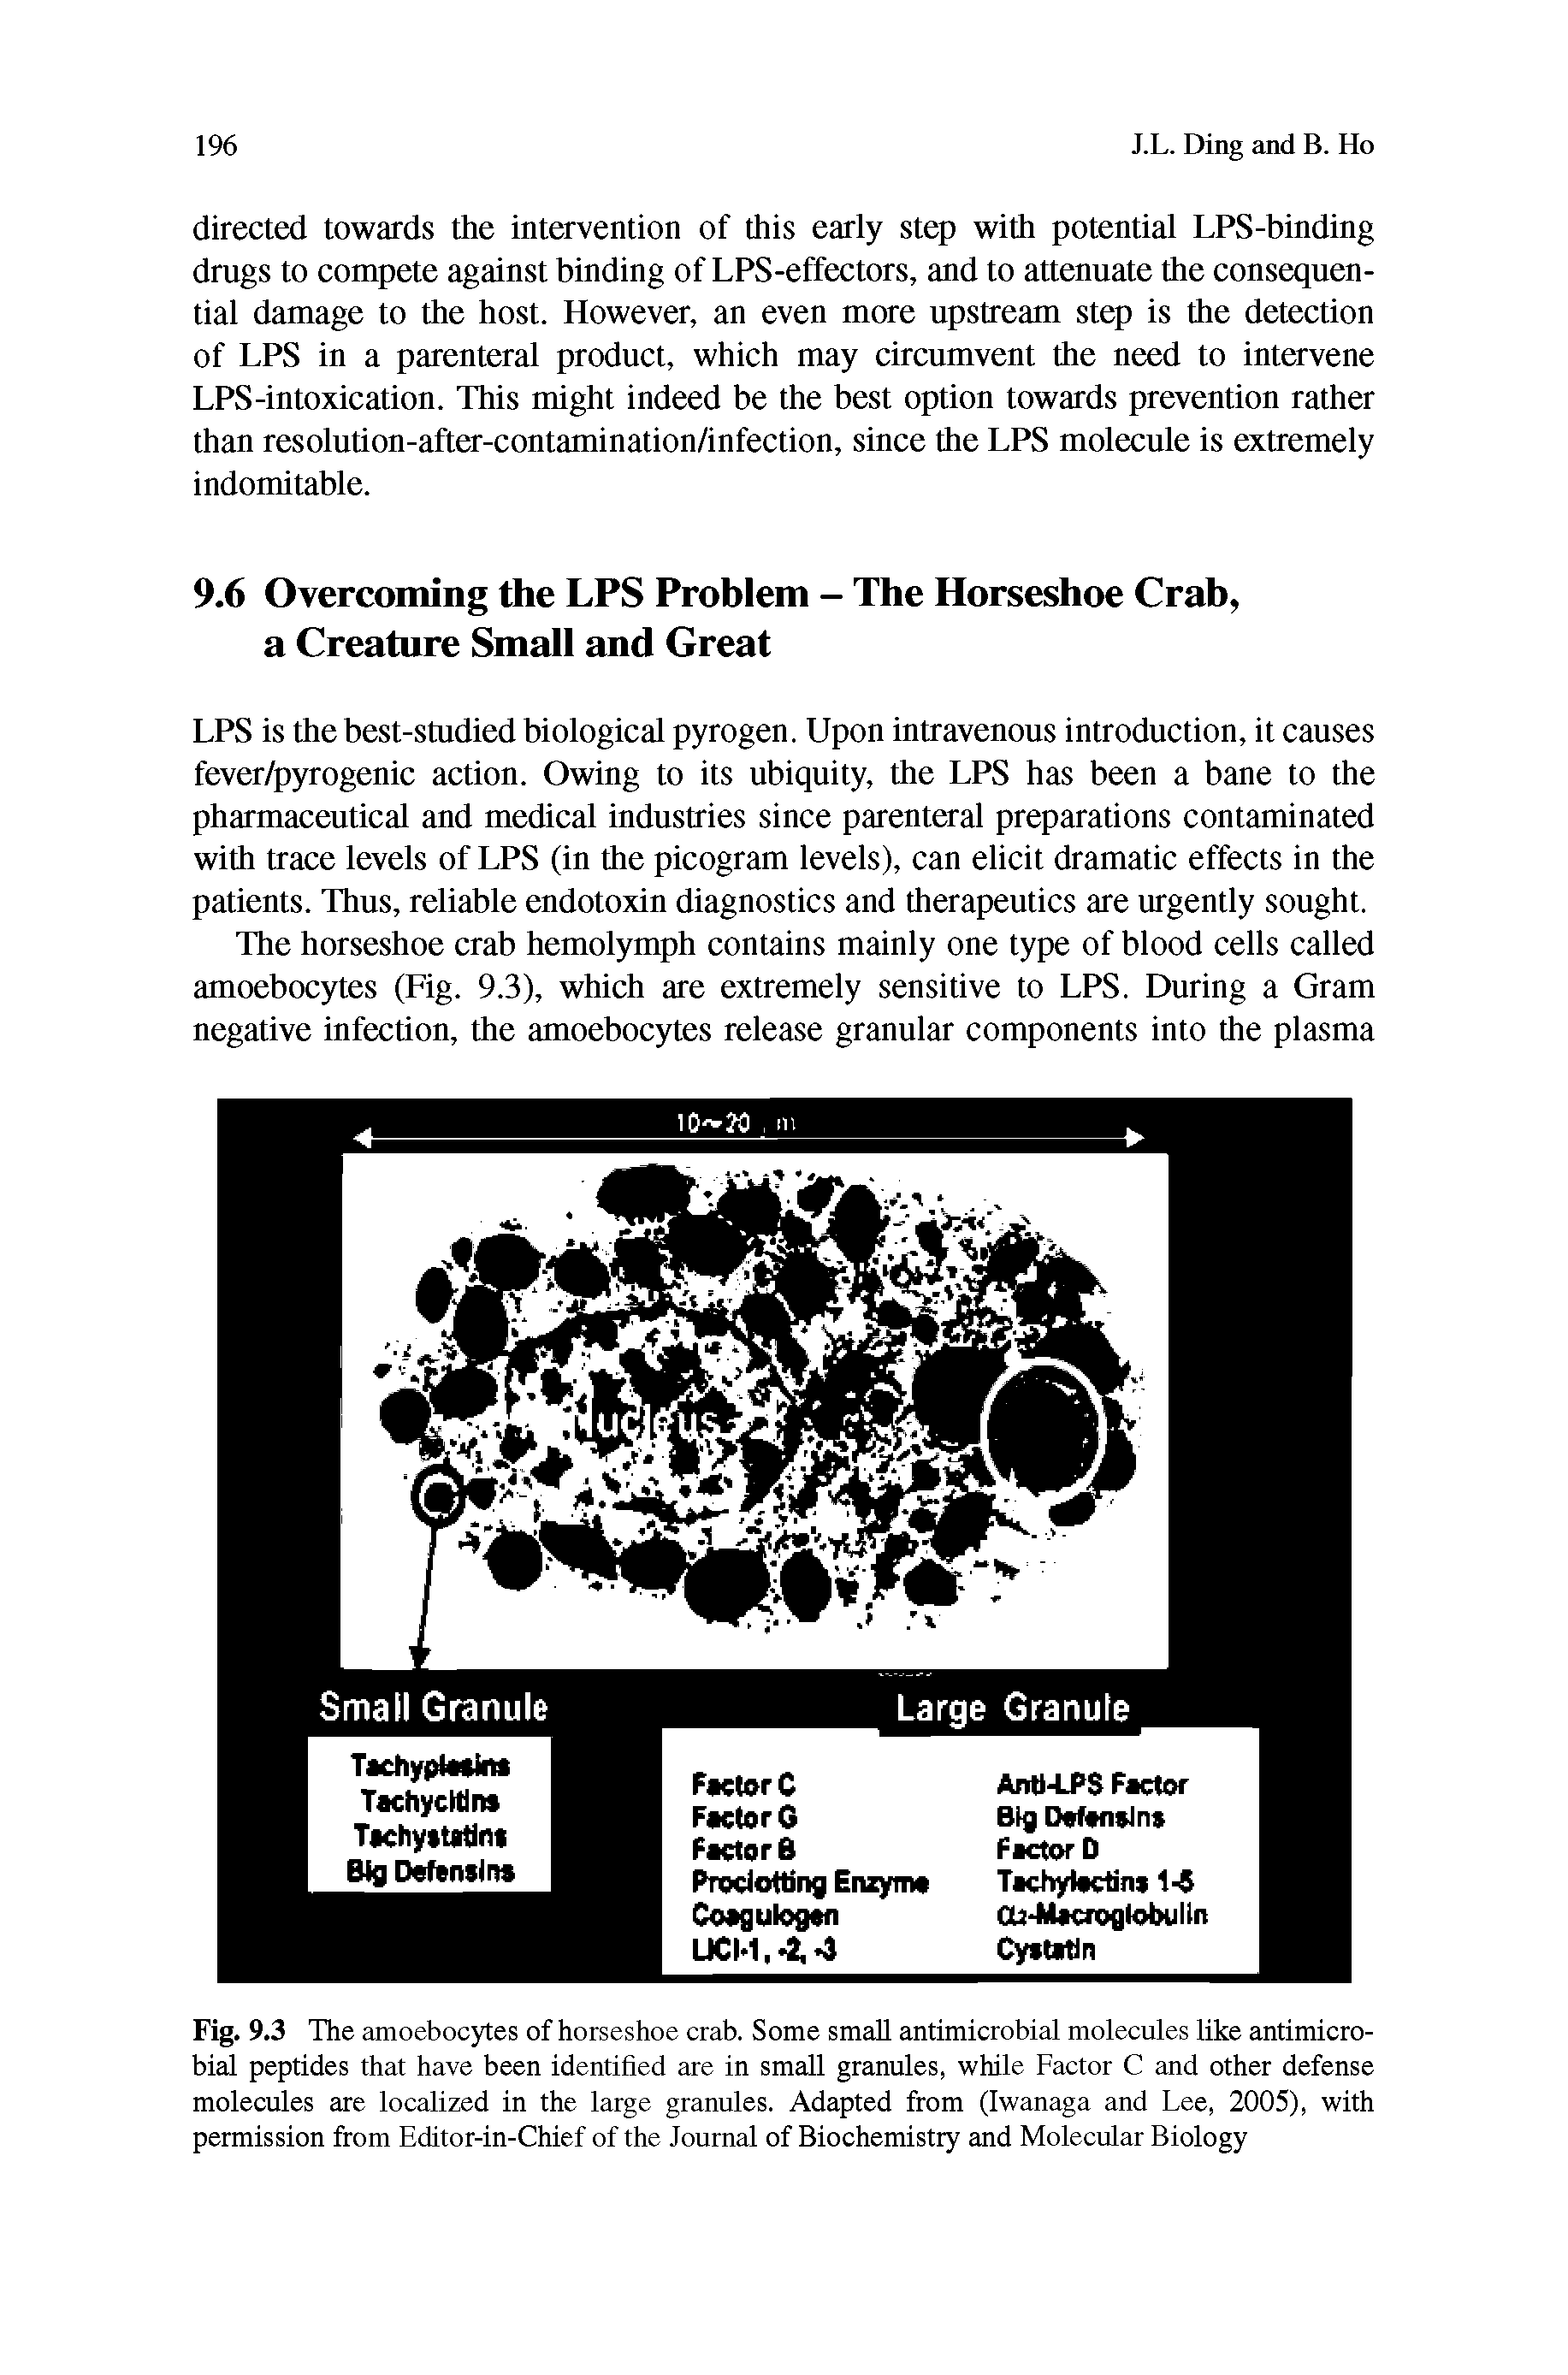 Fig. 9.3 The amoebocytes of horseshoe crab. Some small antimicrobial molecules like antimicrobial peptides that have been identified are in small granules, while Factor C and other defense molecules are localized in the large granules. Adapted from (Iwanaga and Lee, 2005), with permission from Editor-in-Chief of the Journal of Biochemistry and Molecular Biology...